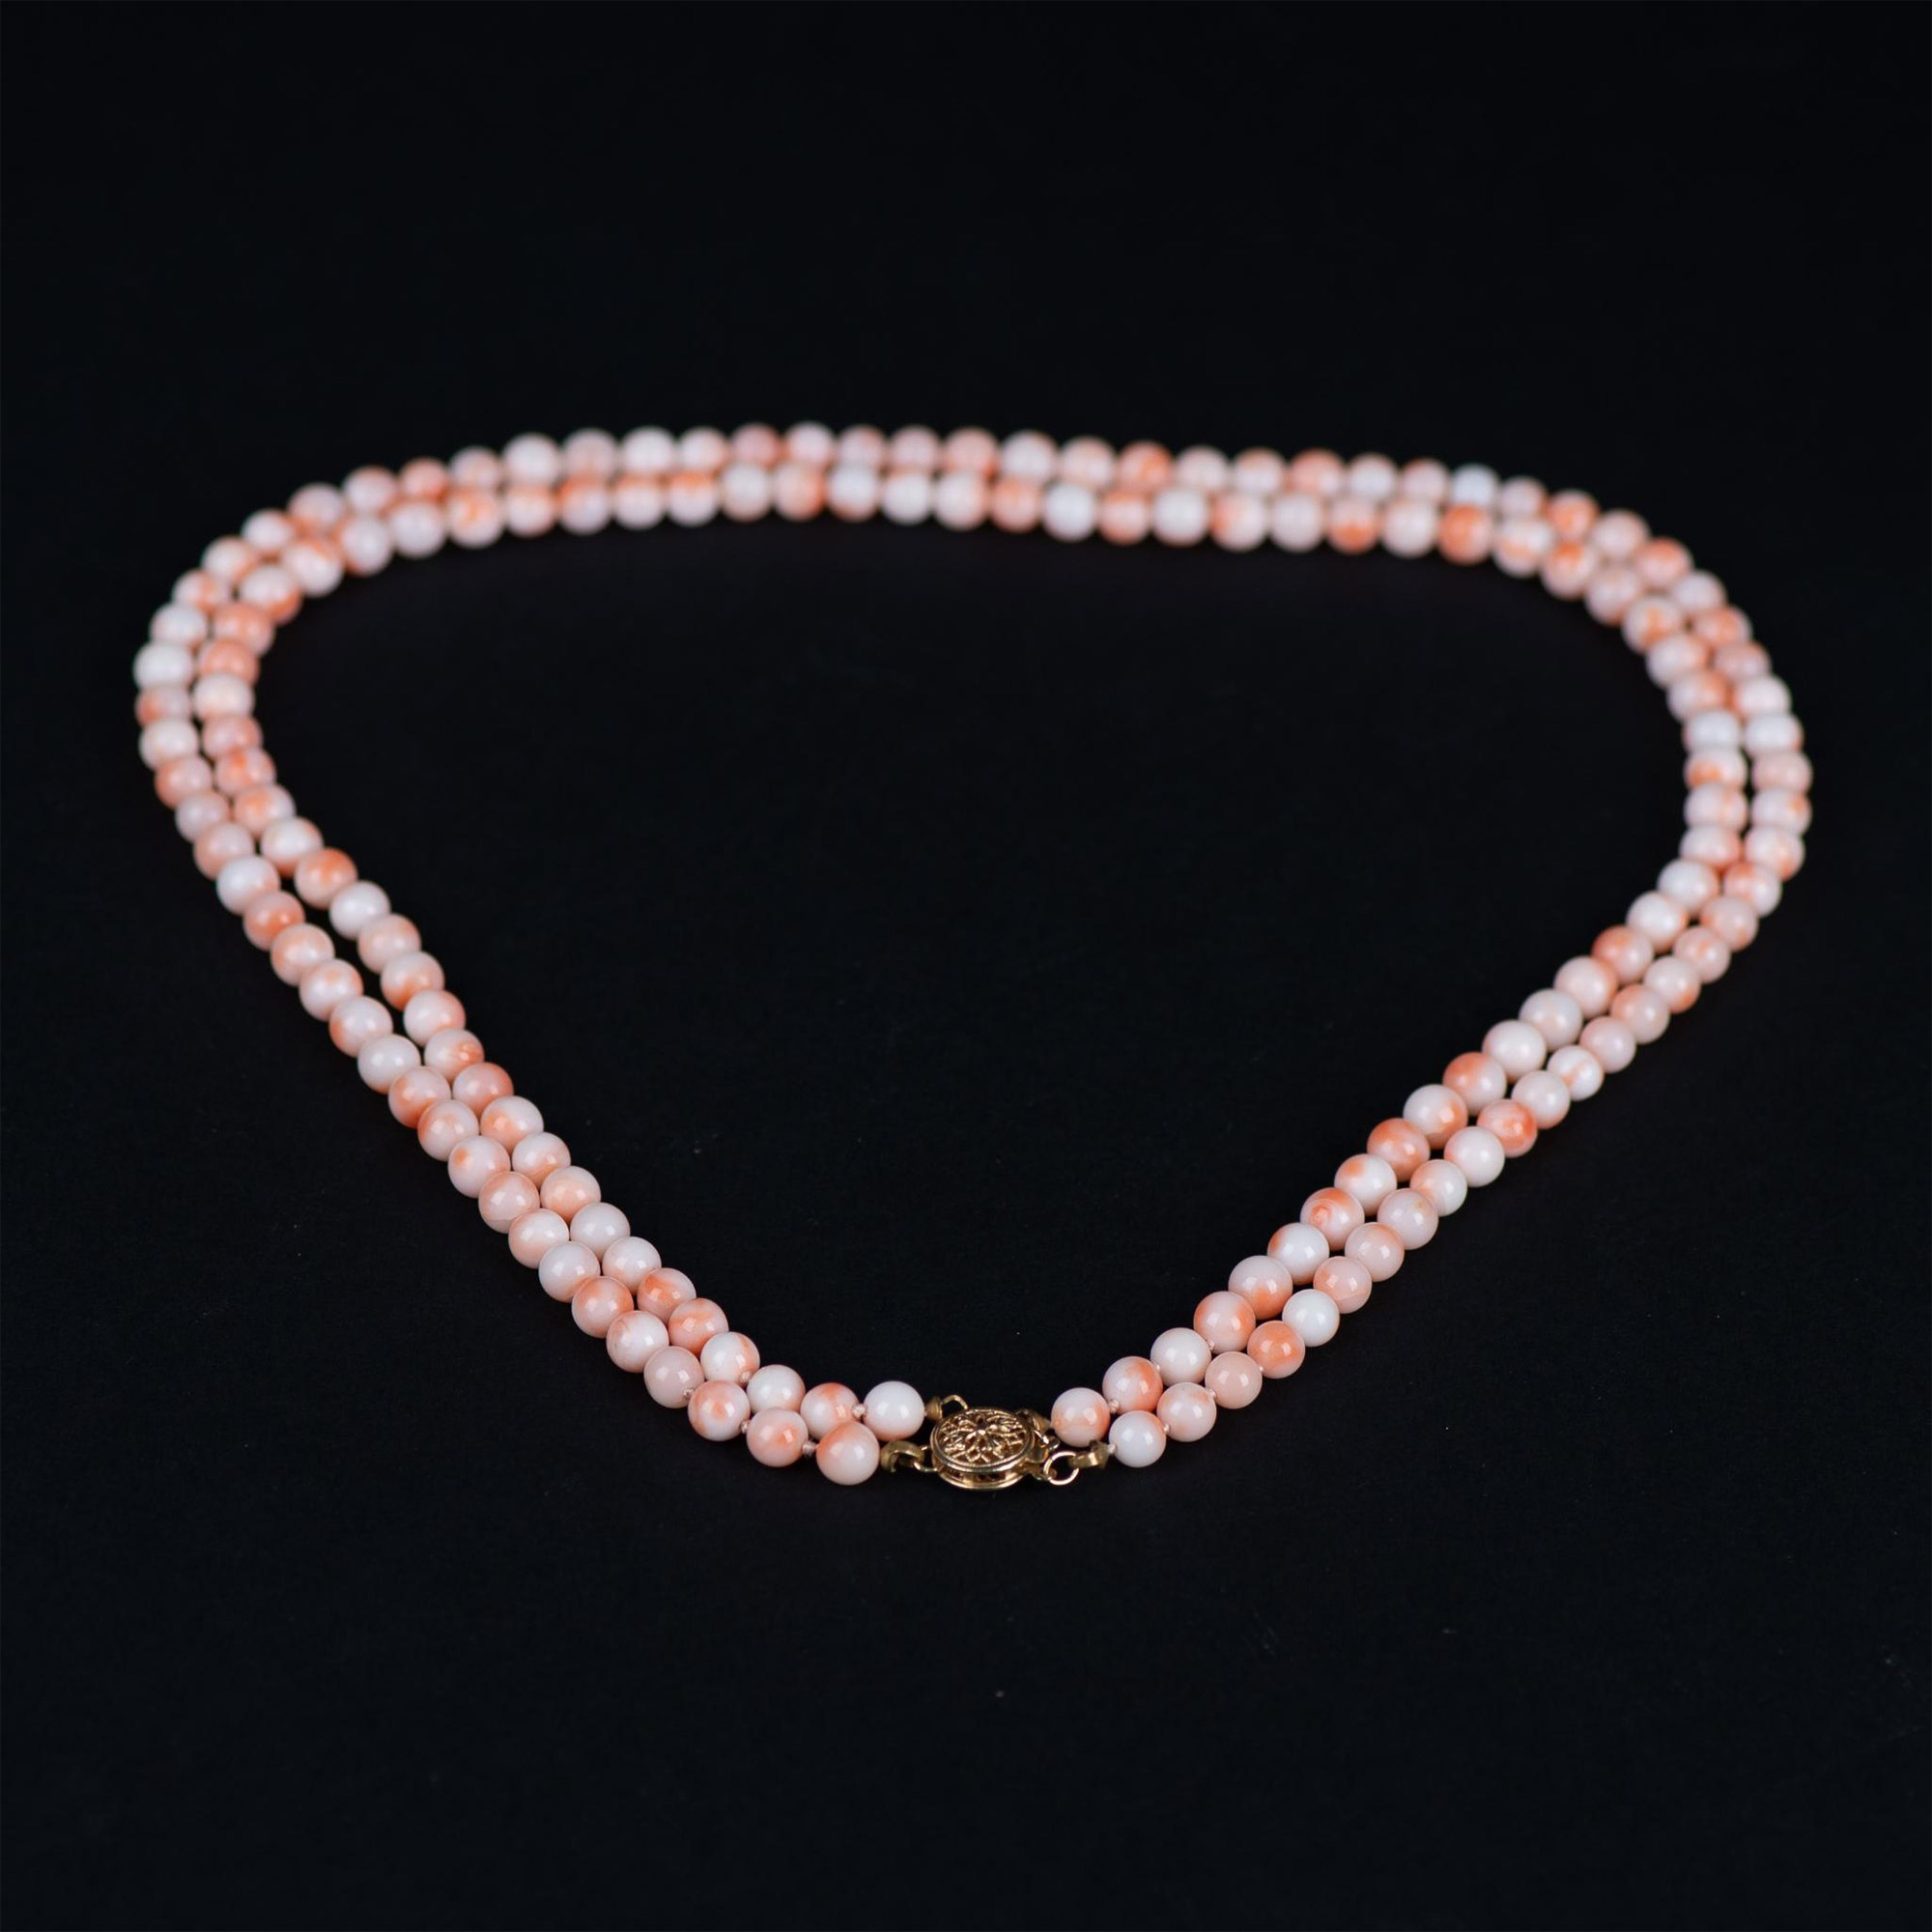 Beautiful 14K Gold Double Strand Coral Bead Necklace - Image 3 of 3